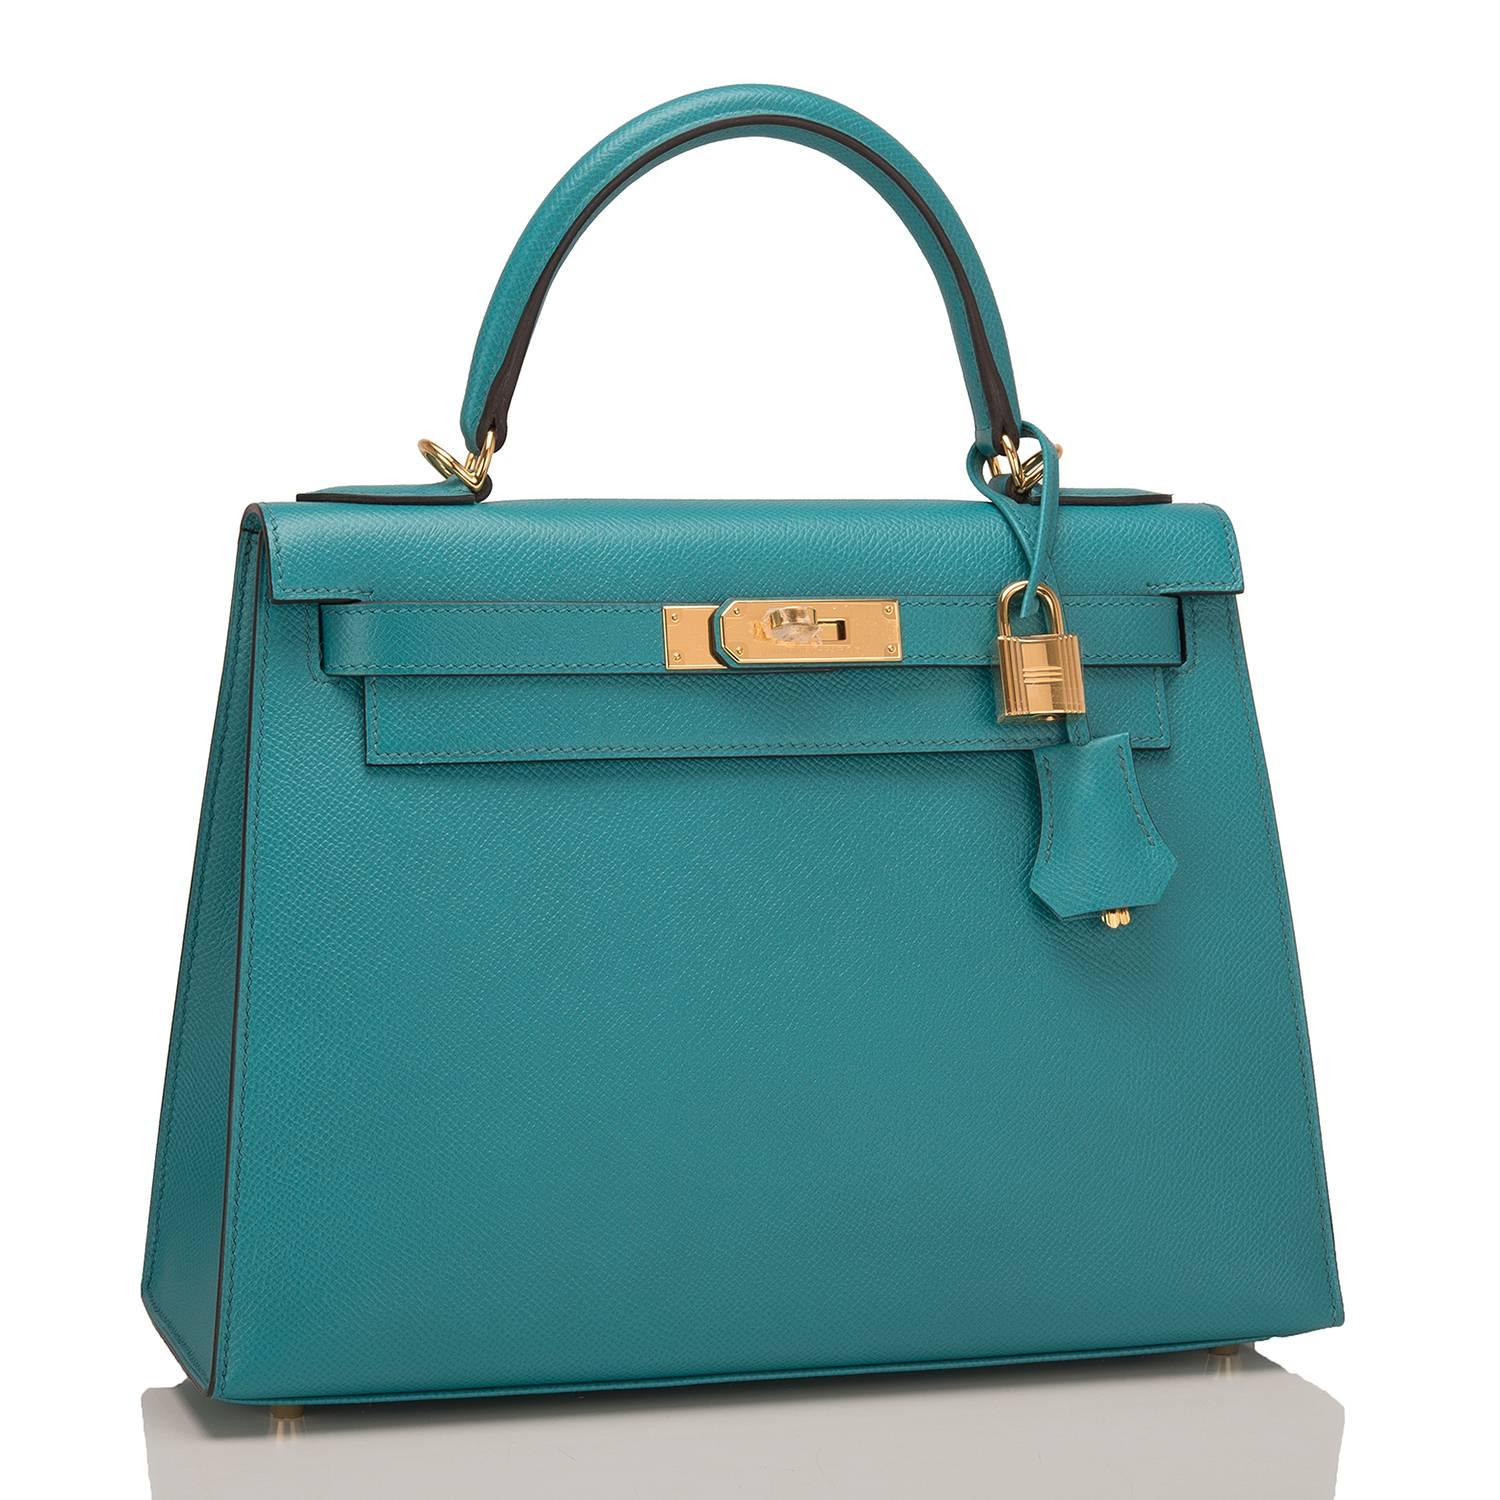 Hermes blue paon Sellier Kelly 28cm of epsom leather with gold hardware.

This Kelly Sellier has tonal stitching, a front toggle closure, a clochette with lock and two keys, a single rolled handle and an optional shoulder strap.

The interior is